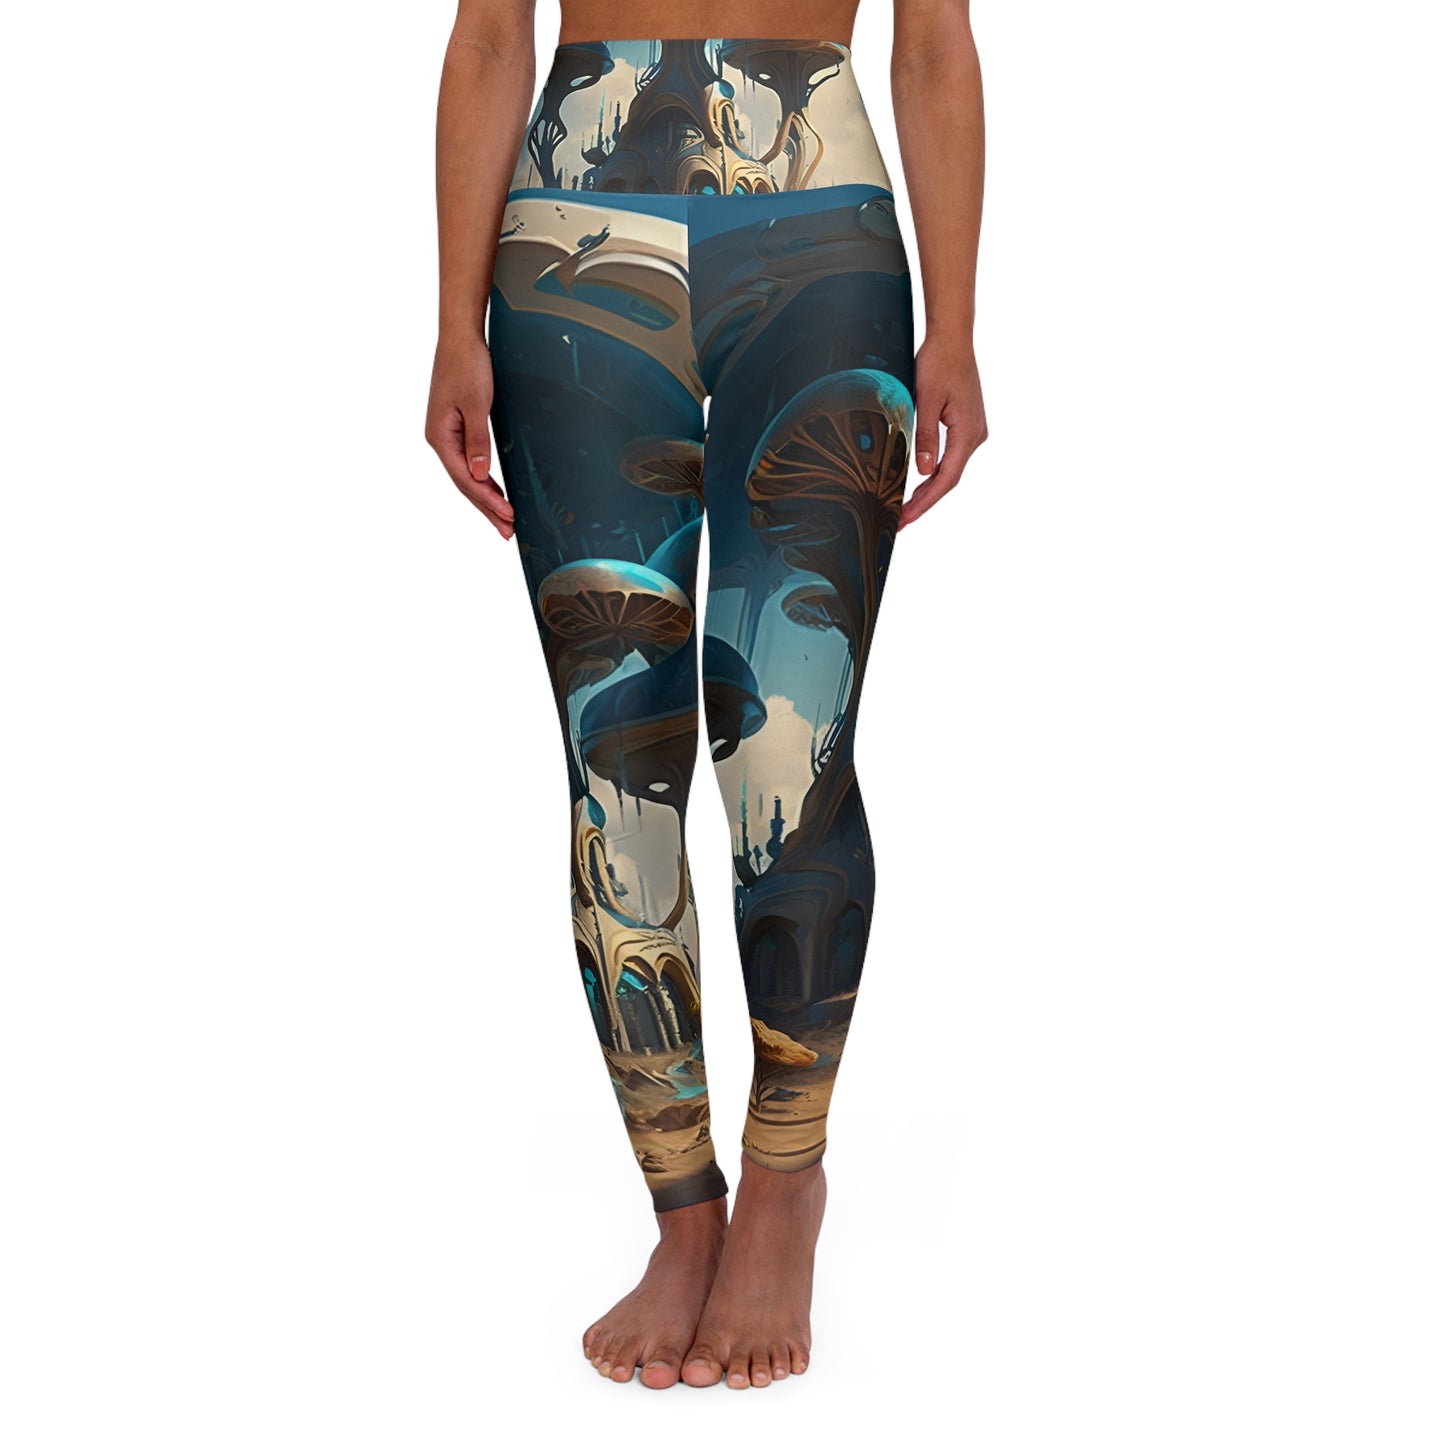 Unleash Your Style with Futuristic Mushroom Leggings - Embrace Magical and Mystical Fashion! High Waisted Yoga Pants, Whimsical Design Style, Woman Girl